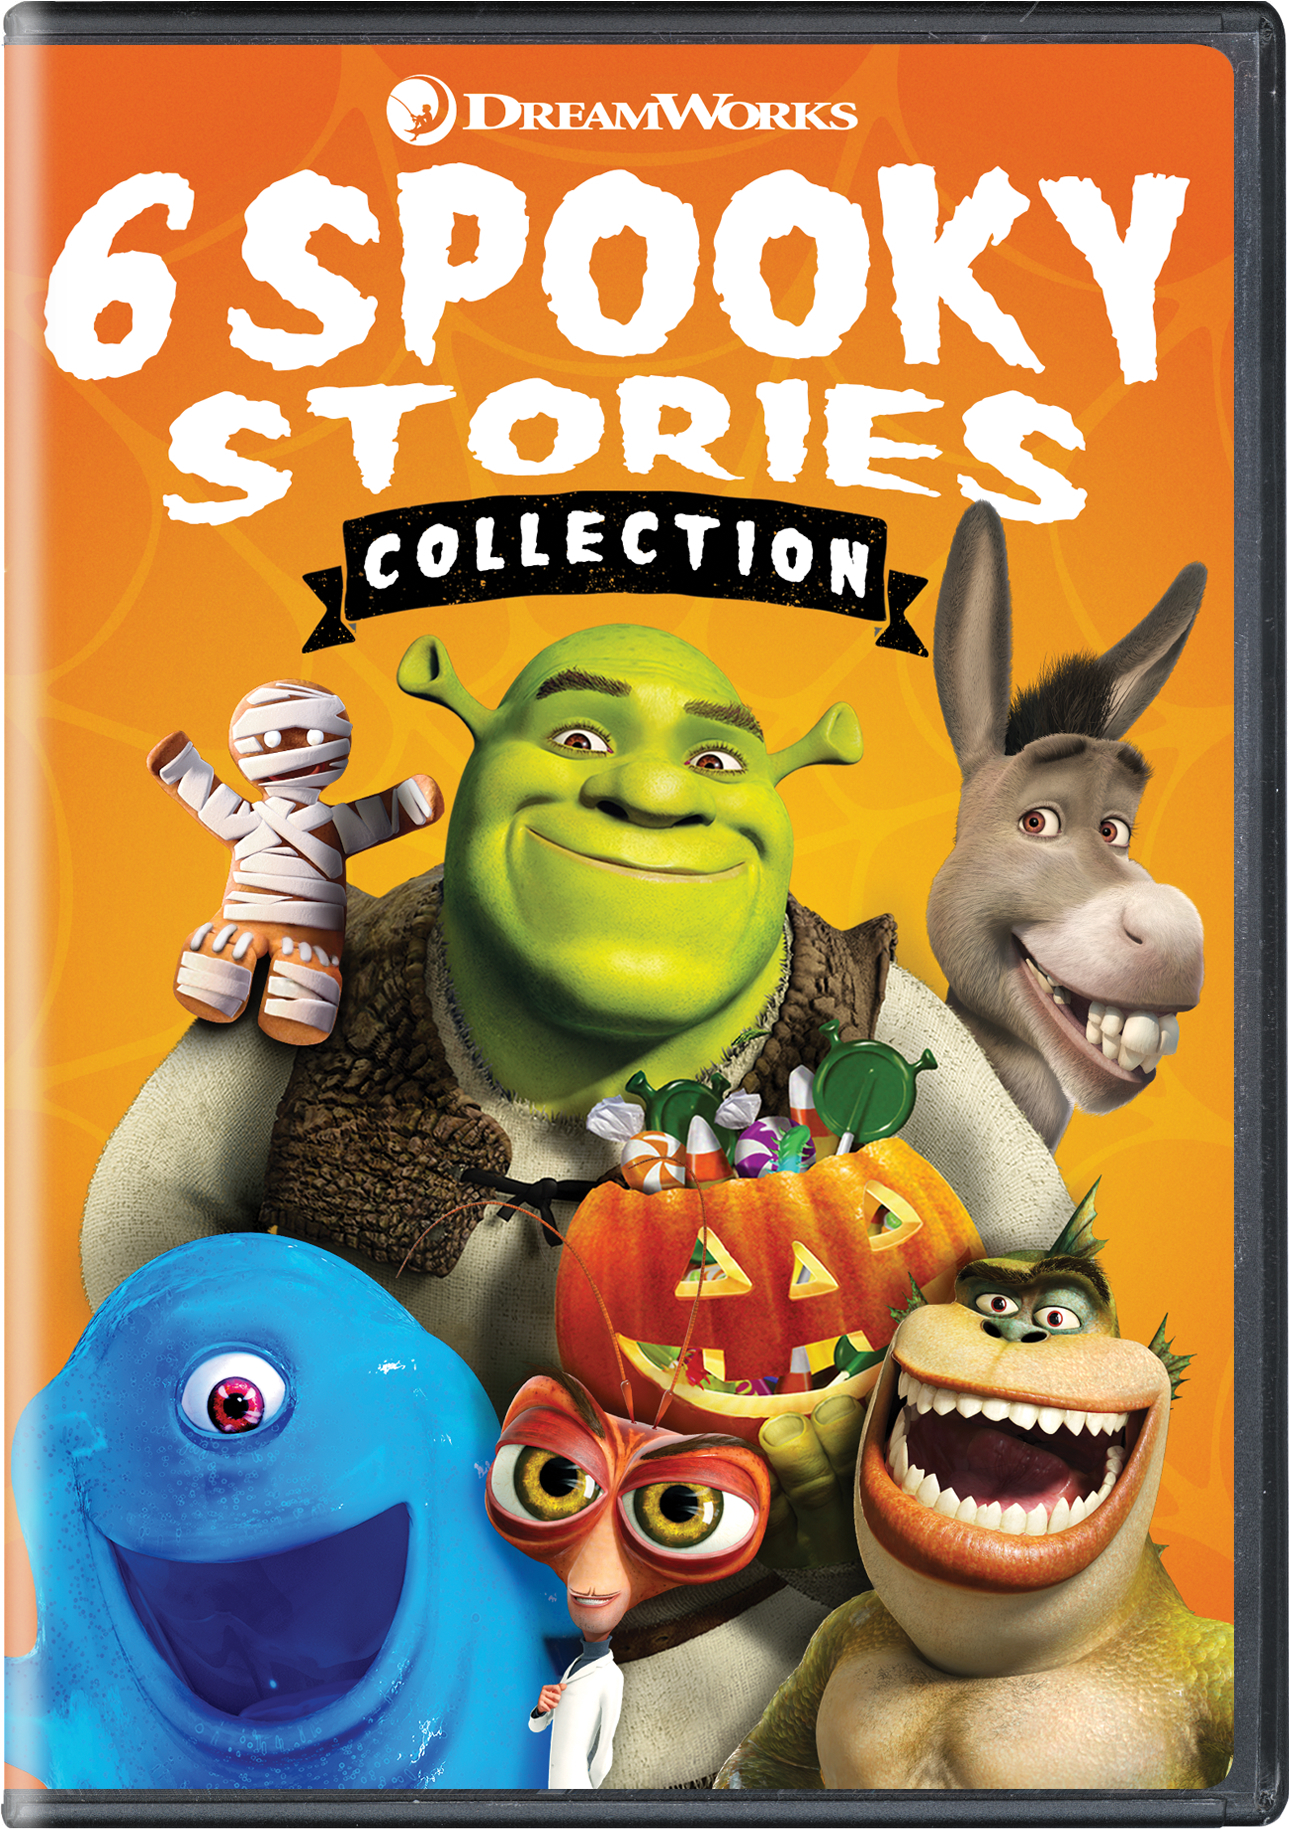 DreamWorks 6 Spooky Stories Collection (DVD Set) - DVD   - Children Movies On DVD - Movies On GRUV